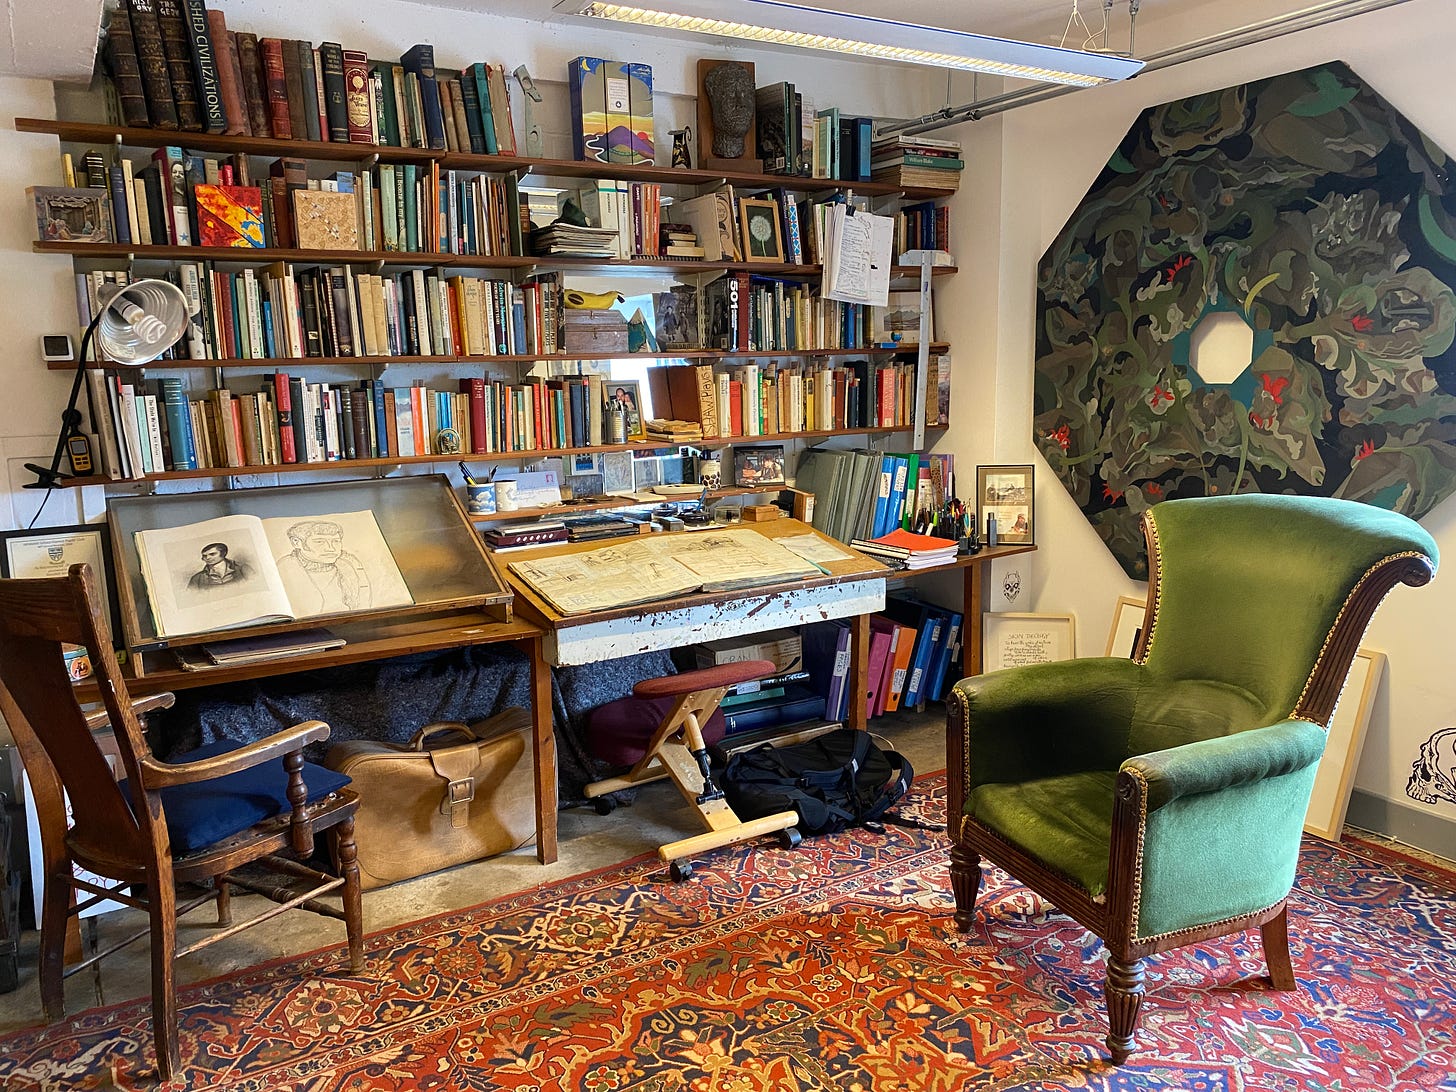 alasdair gray's desk and books and chair